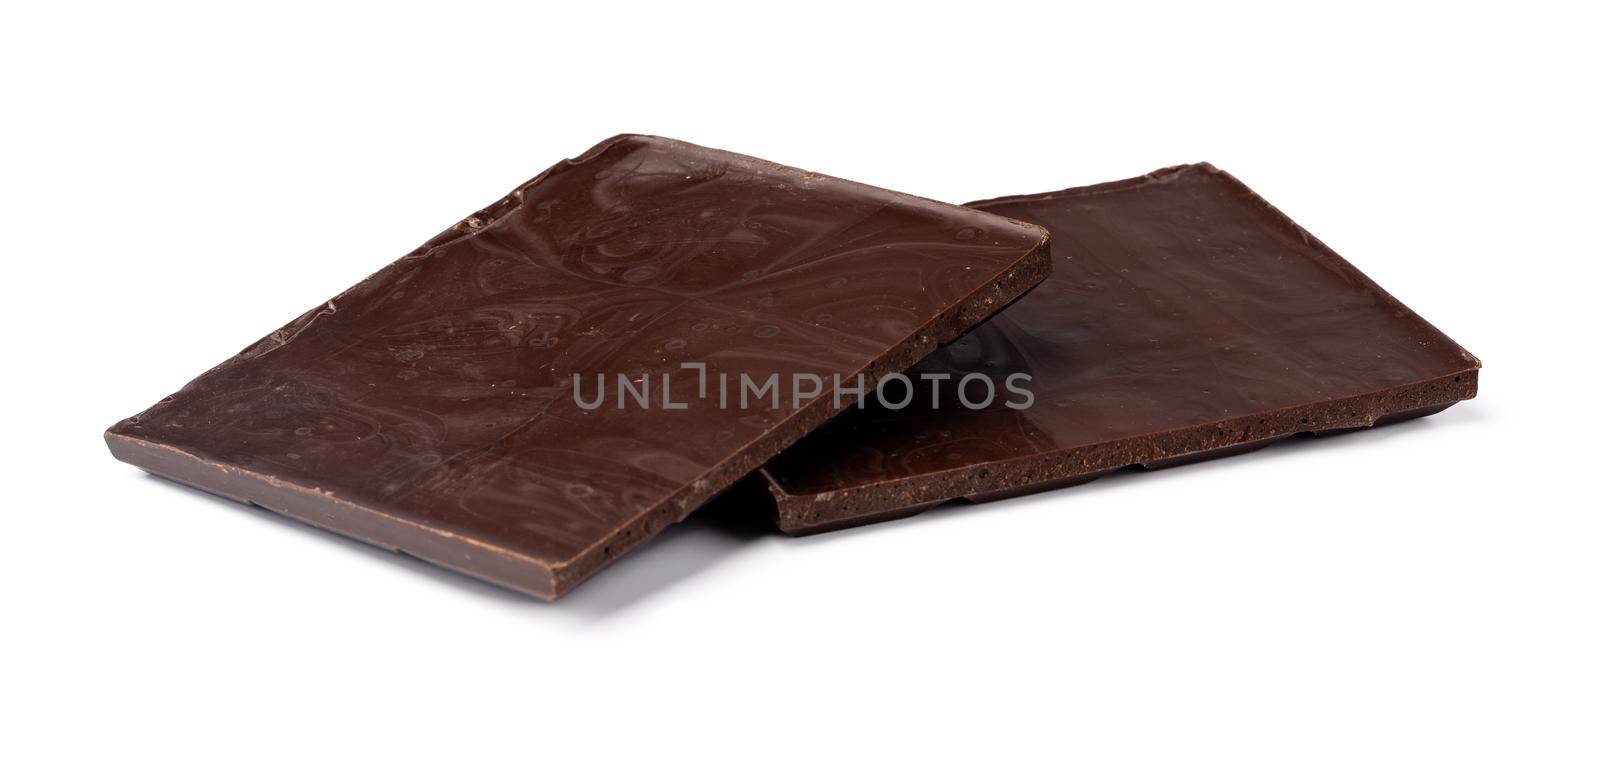 Small dark chocolate pieces isolated on white background, close up